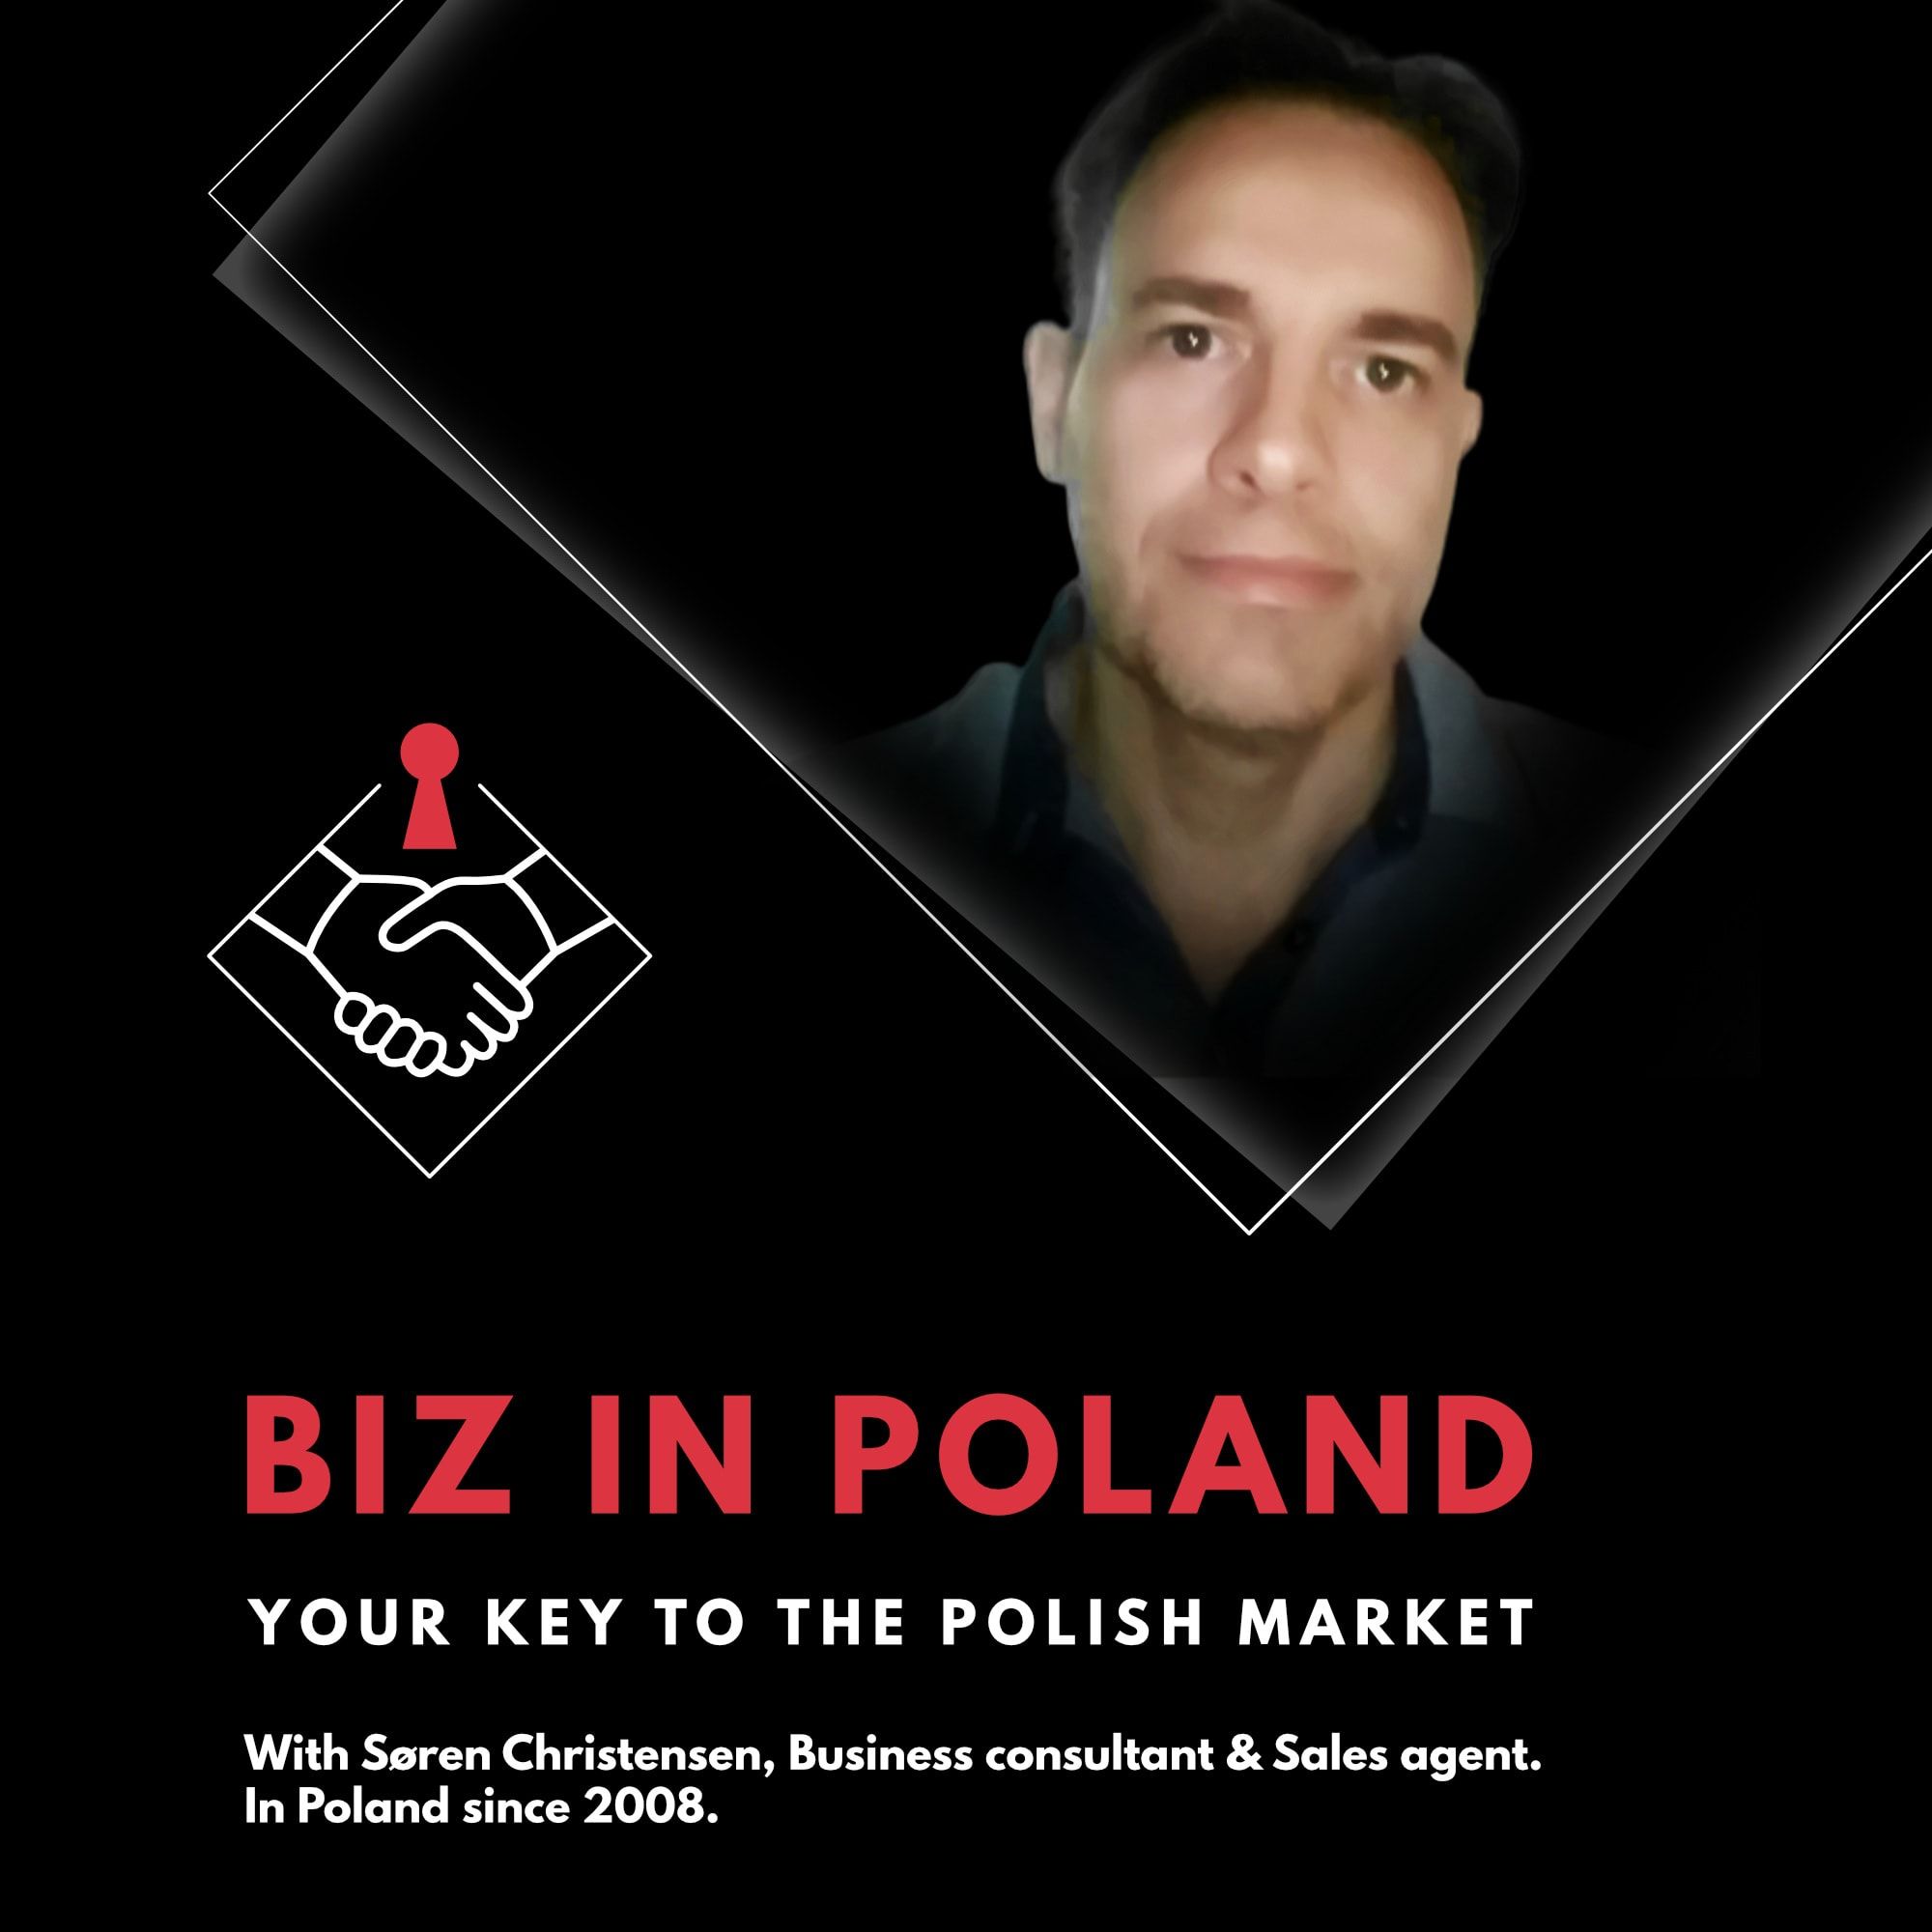 Consulting regarding doing business in Poland